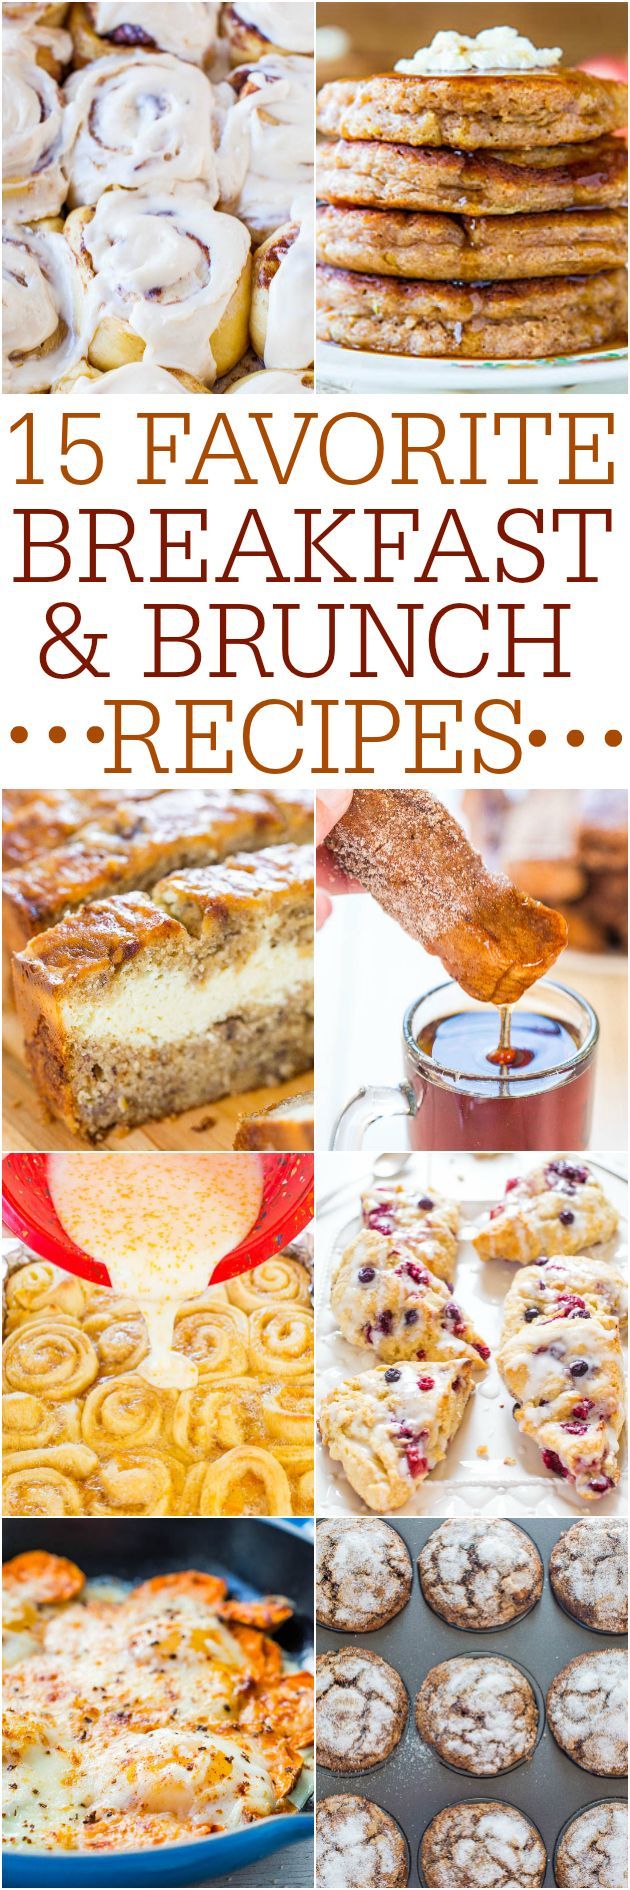 15 Favorite Breakfast and Brunch Recipes – Fast and easy tried-and-true recipes that everyone will love!